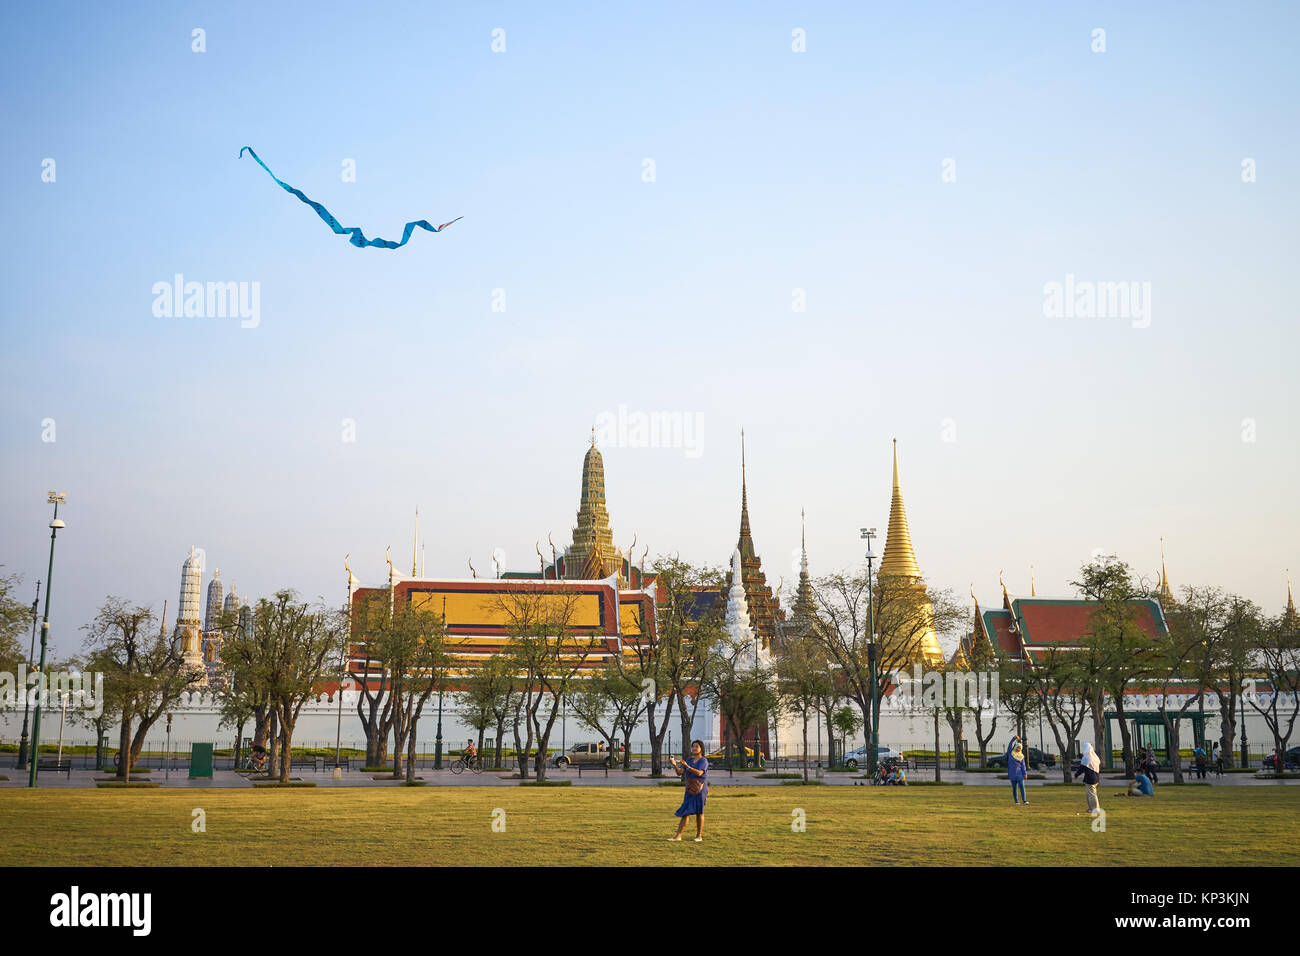 A woman plays with kite in front of the Grand Palace in Bangkok, Thailand Stock Photo